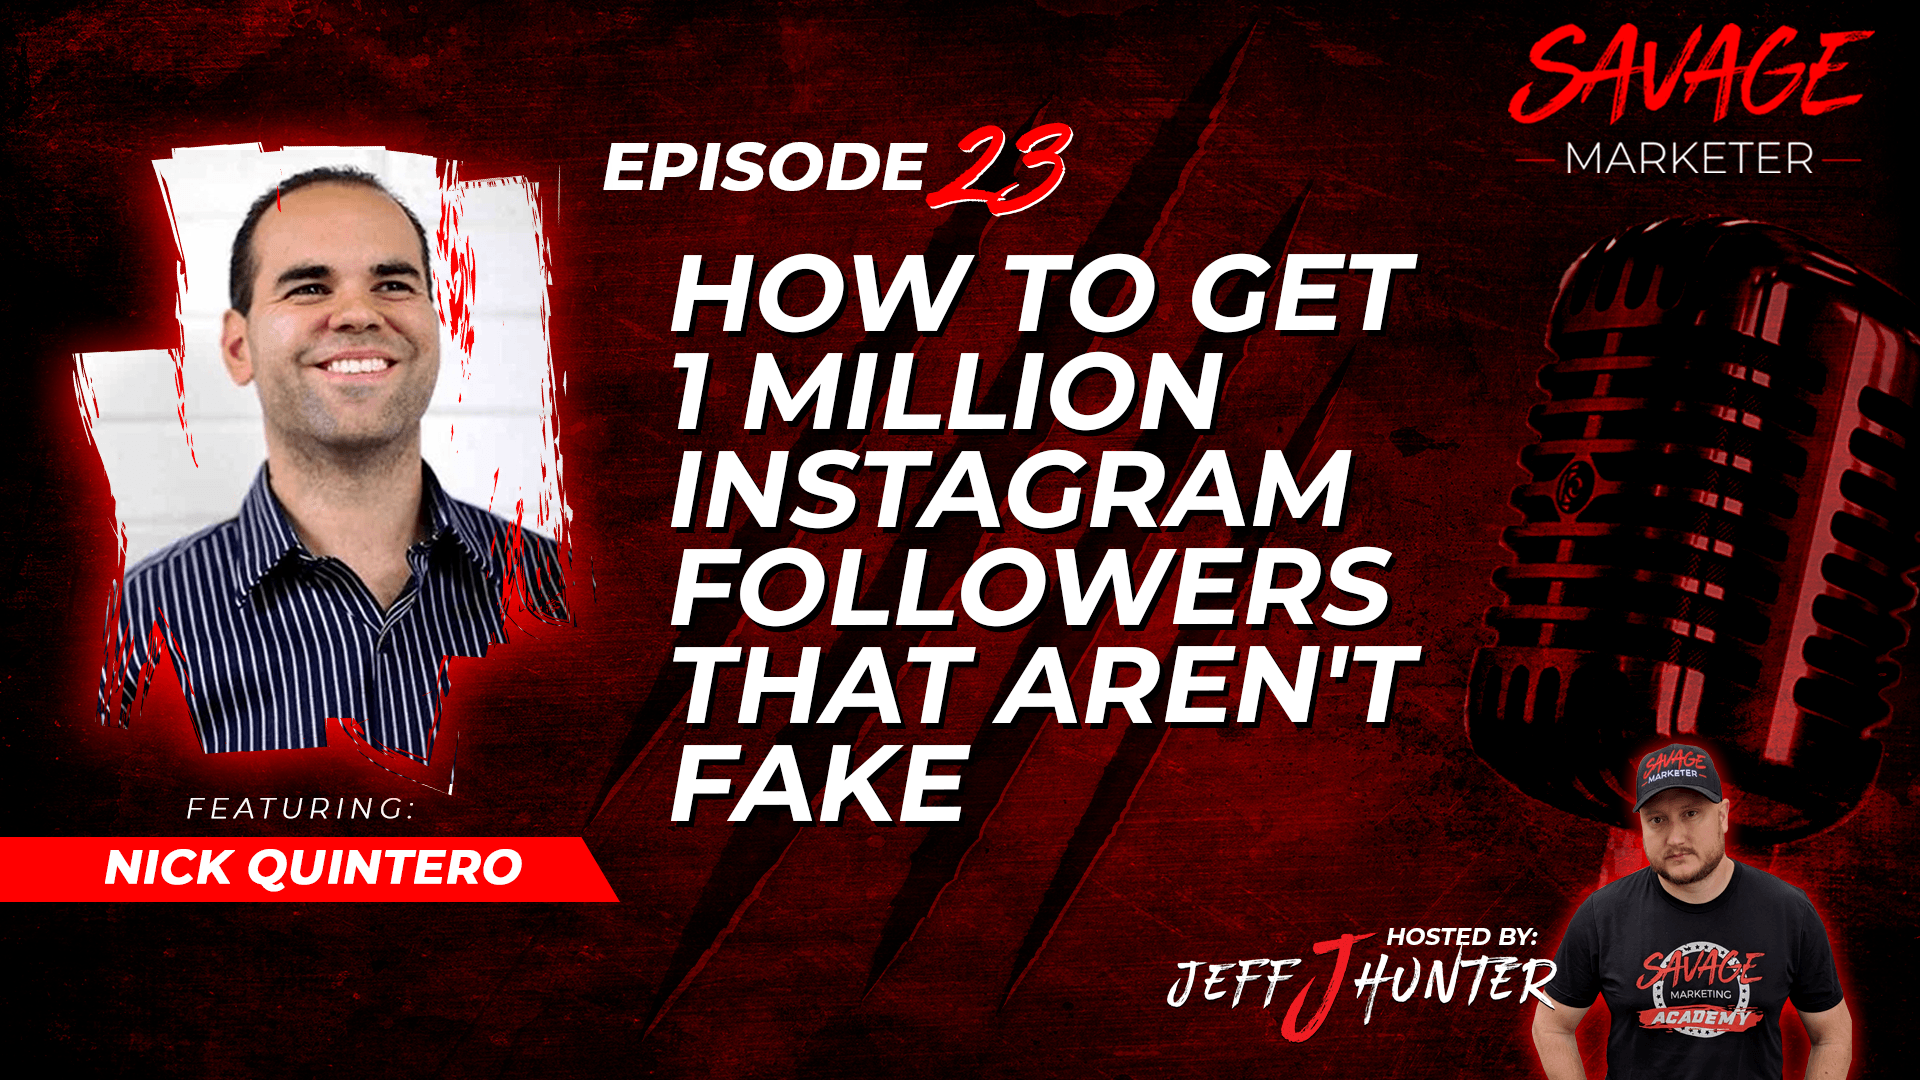 How to get 1 million instagram followers that arent fake Nick Quintero